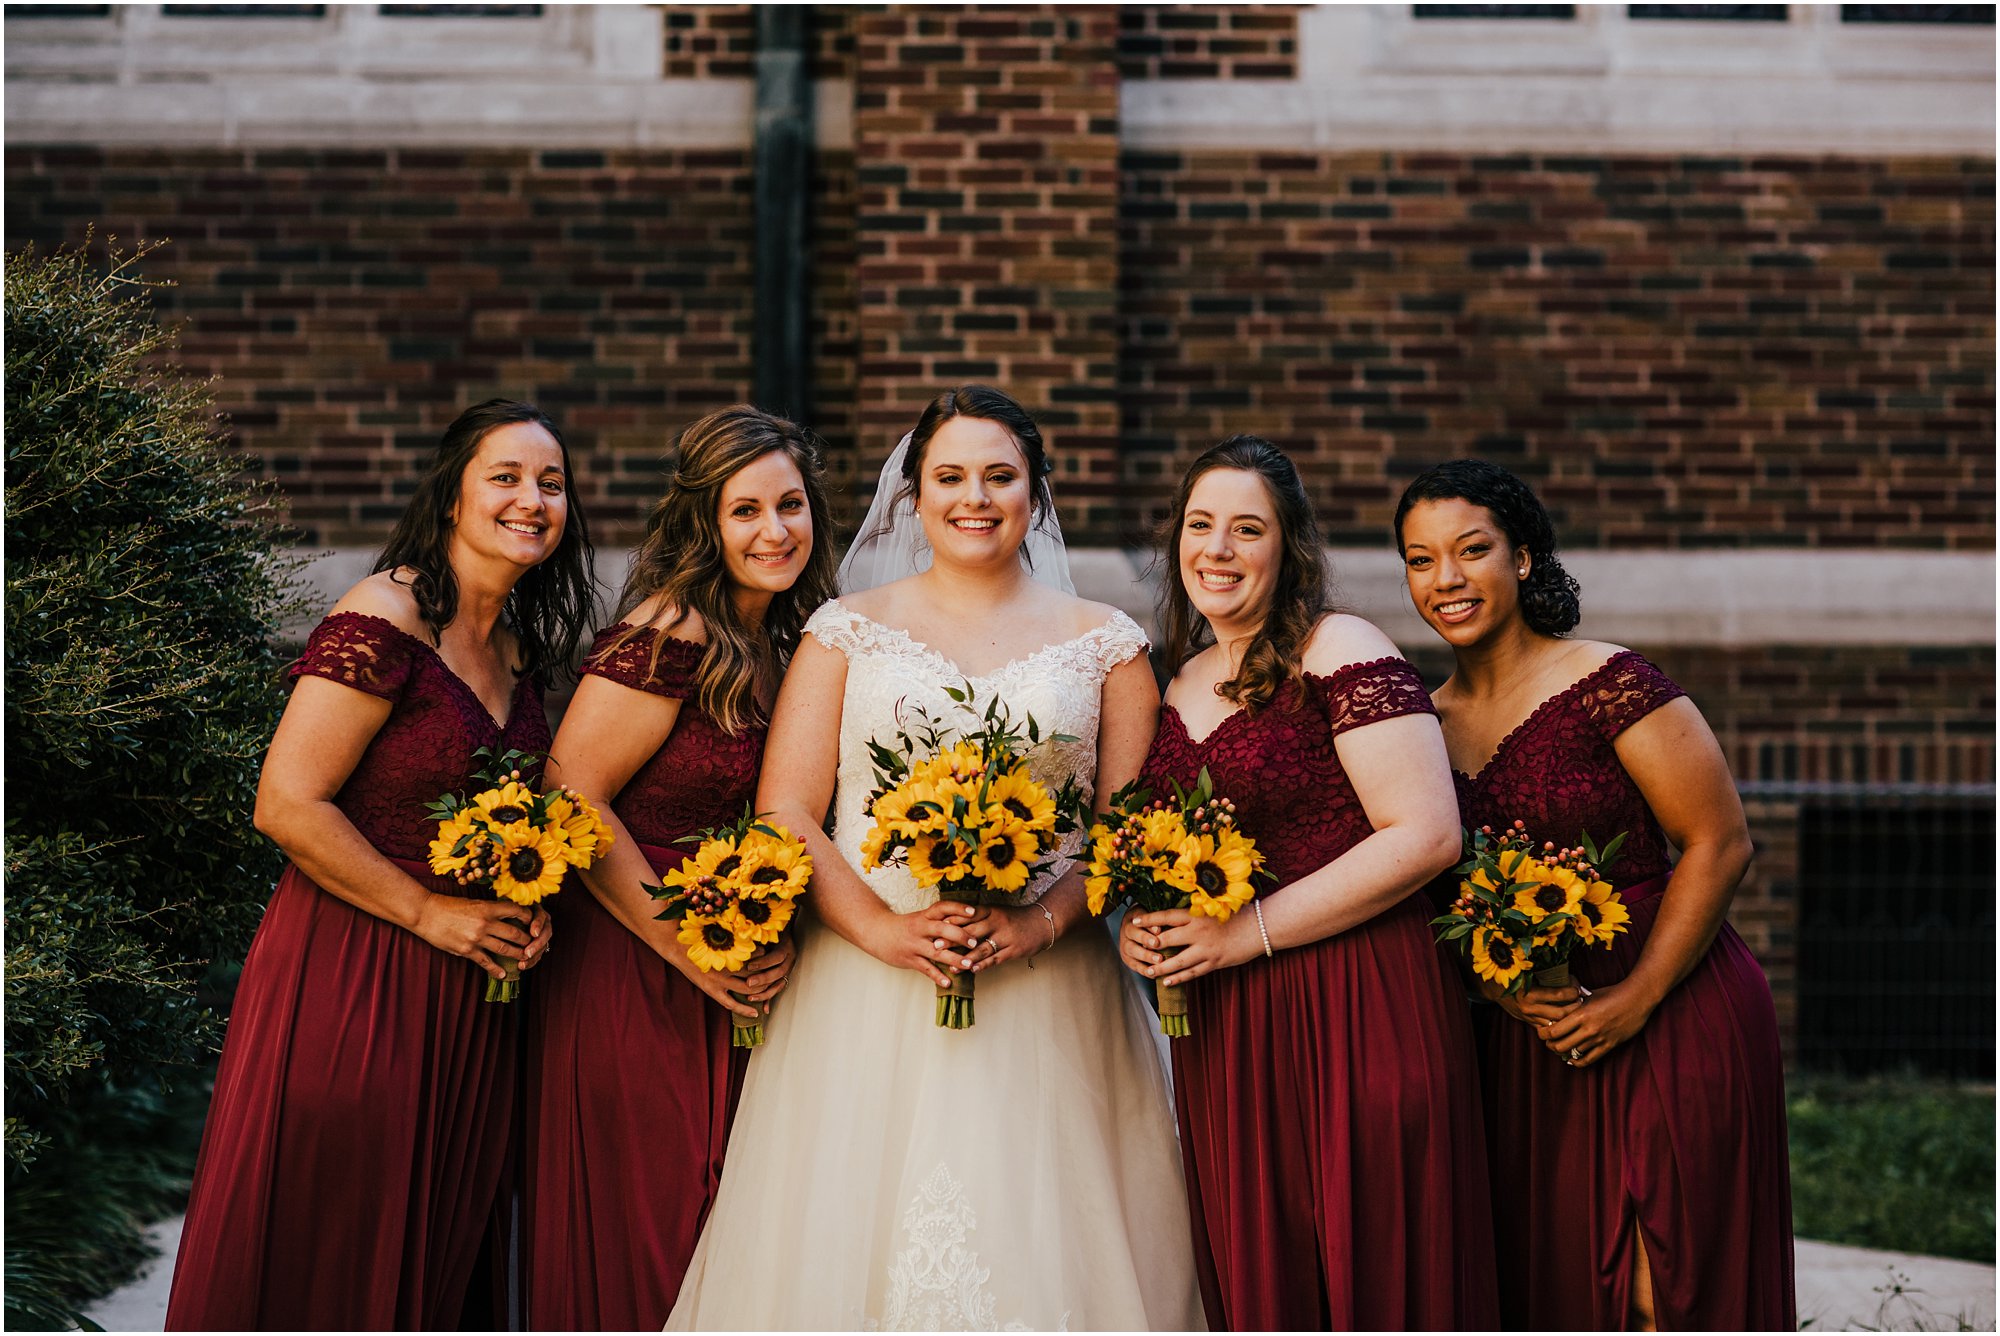 Bride Lauren with her bridesmaids smiling together outside of St. Luke's Church in Memphis